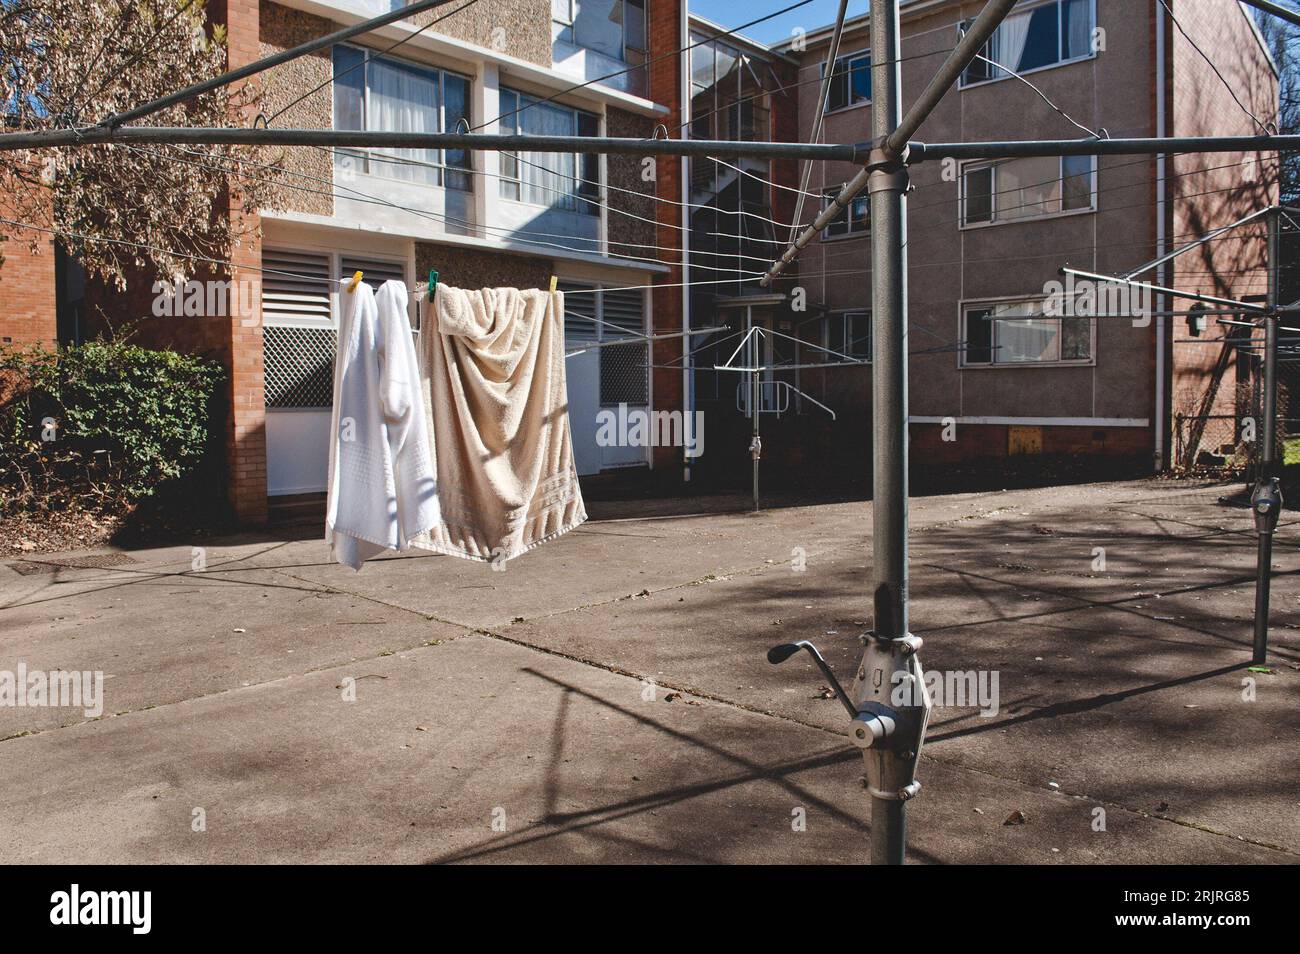 A vintage metal Hills Hoist clothesline stands outside a weathered apartment building Stock Photo